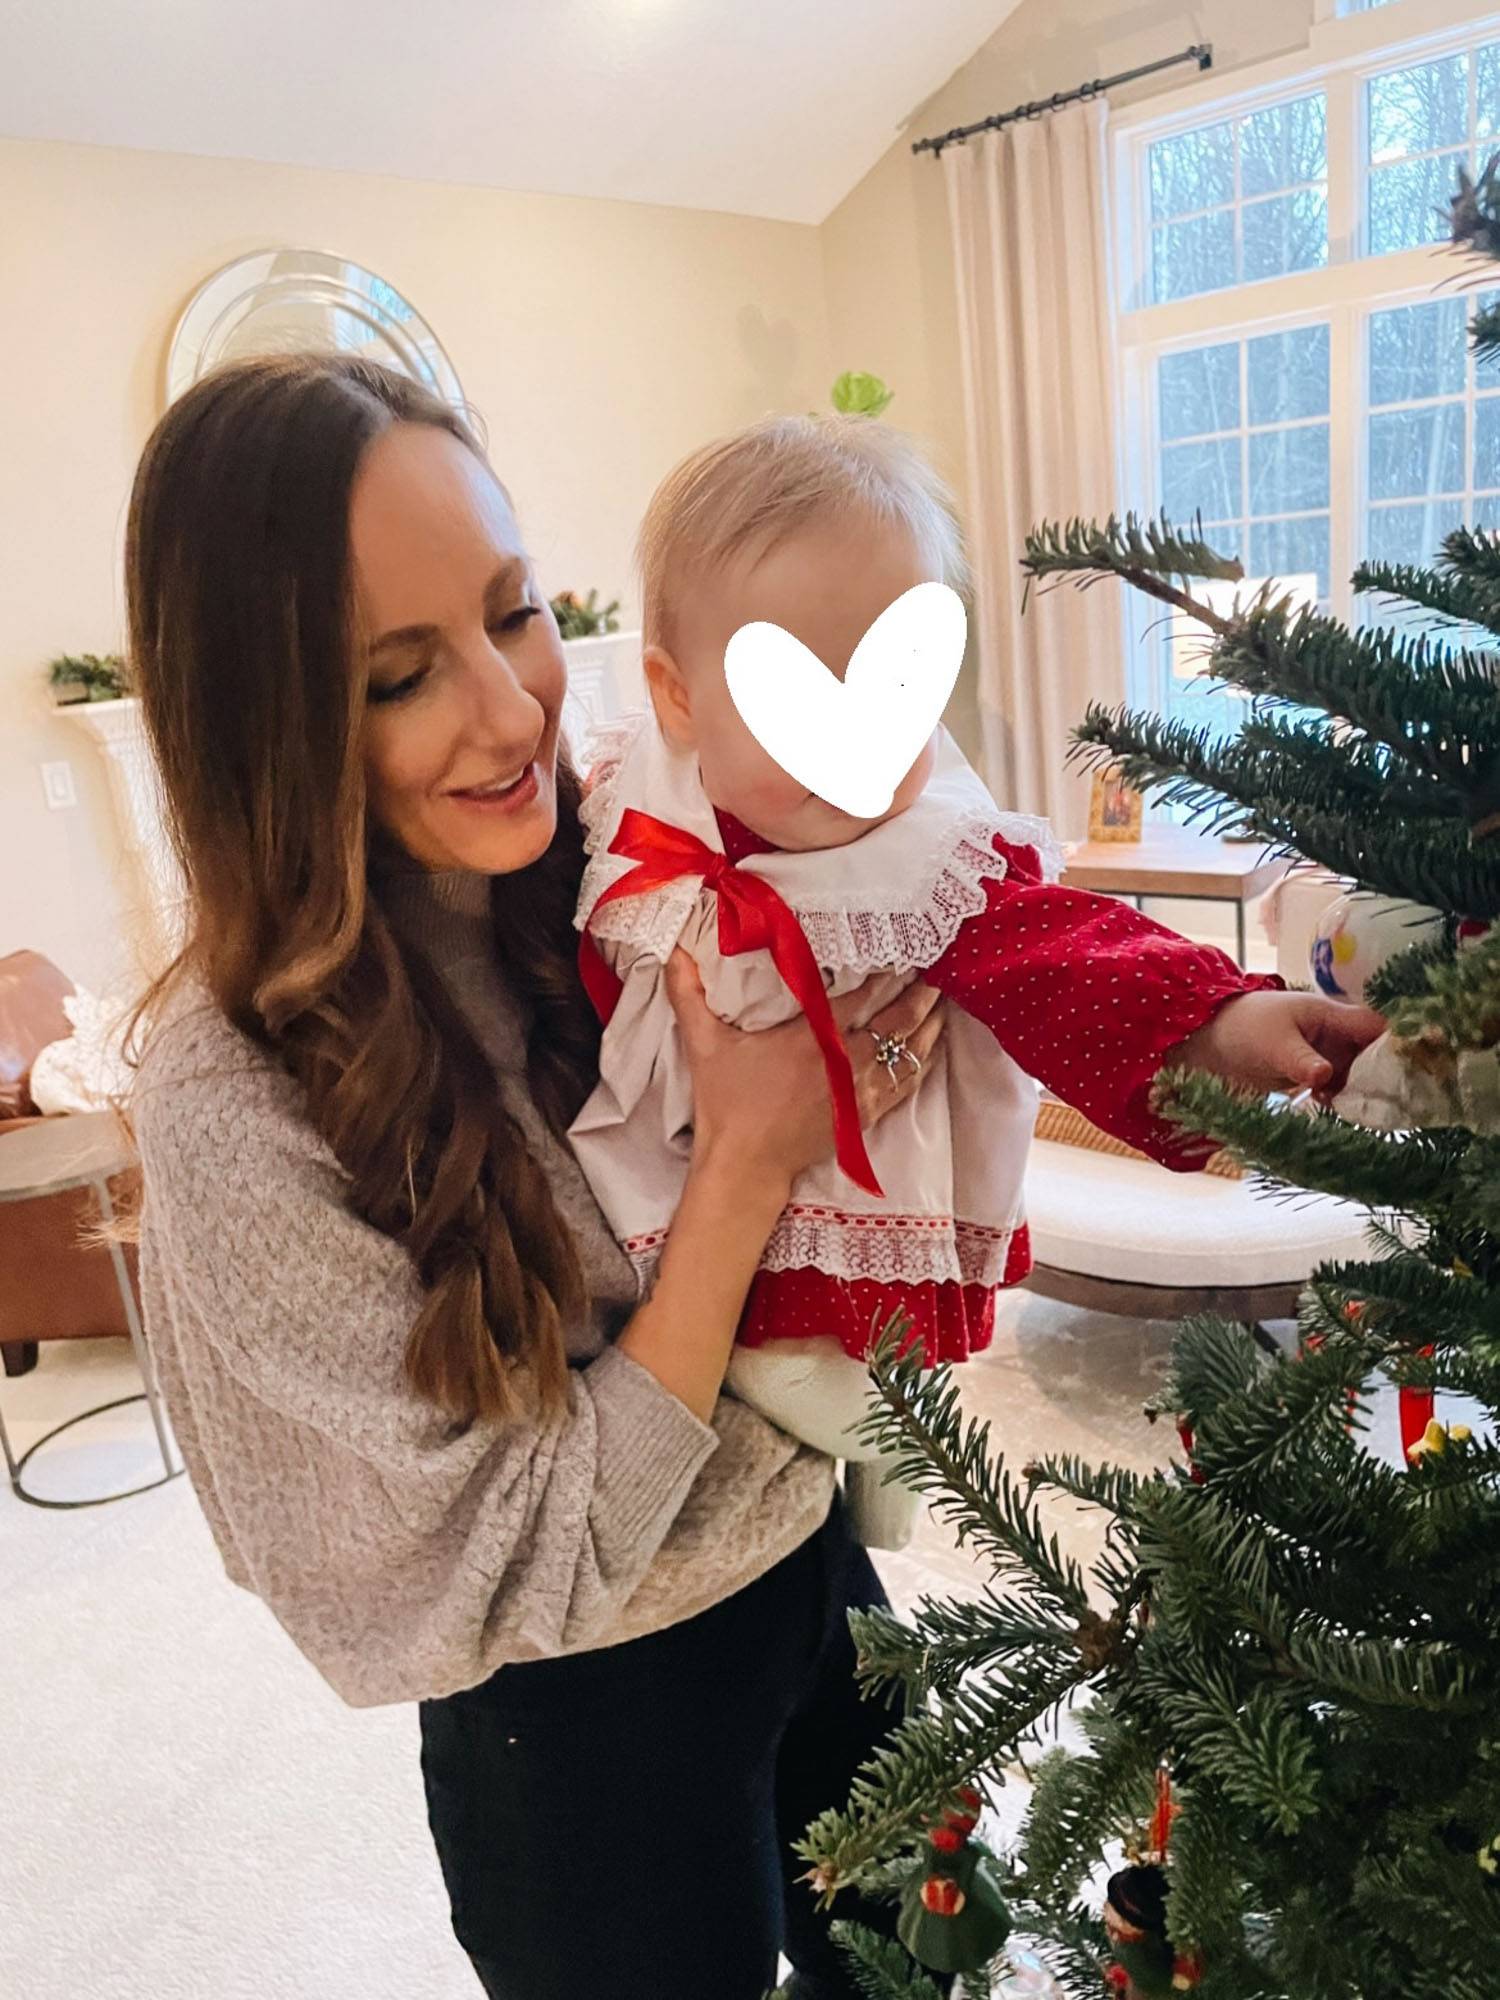 Woman and baby dressed in formal clothing playing with Christmas ornaments on a tree.